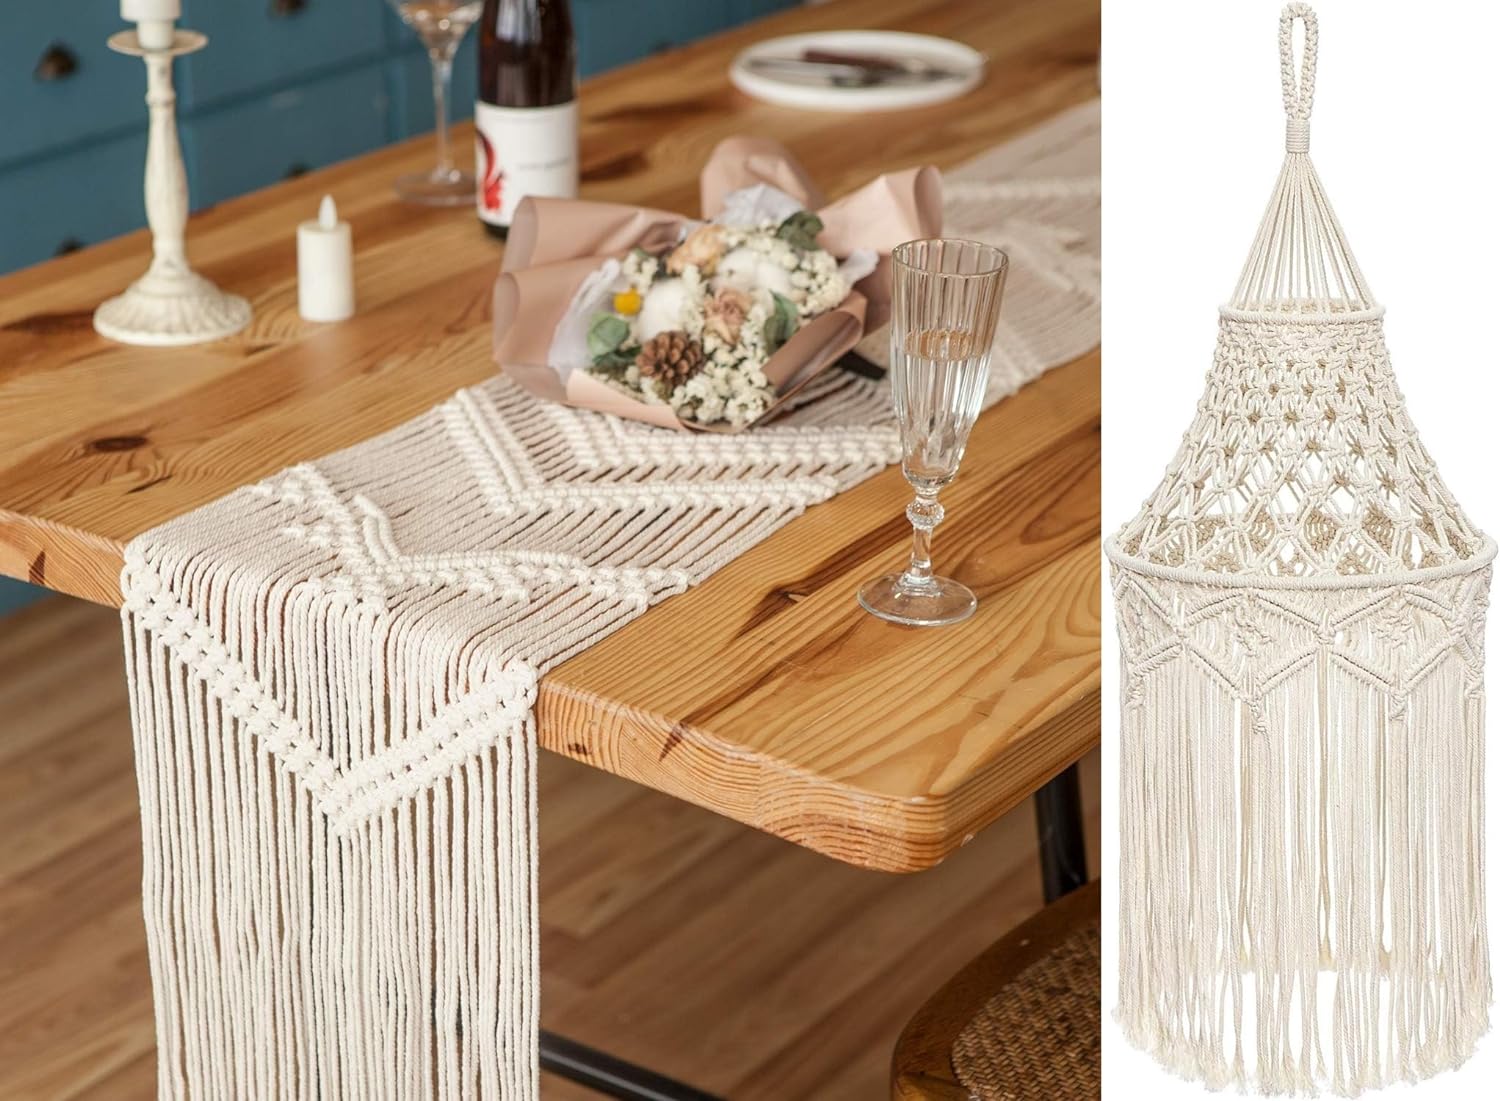 Mkono Boho Macrame Table Runner and Lamp Shade, Woven Christmas Party Decor Handmade Linen Placemats Light Cover Home Decoration for Dining Room Kitchen